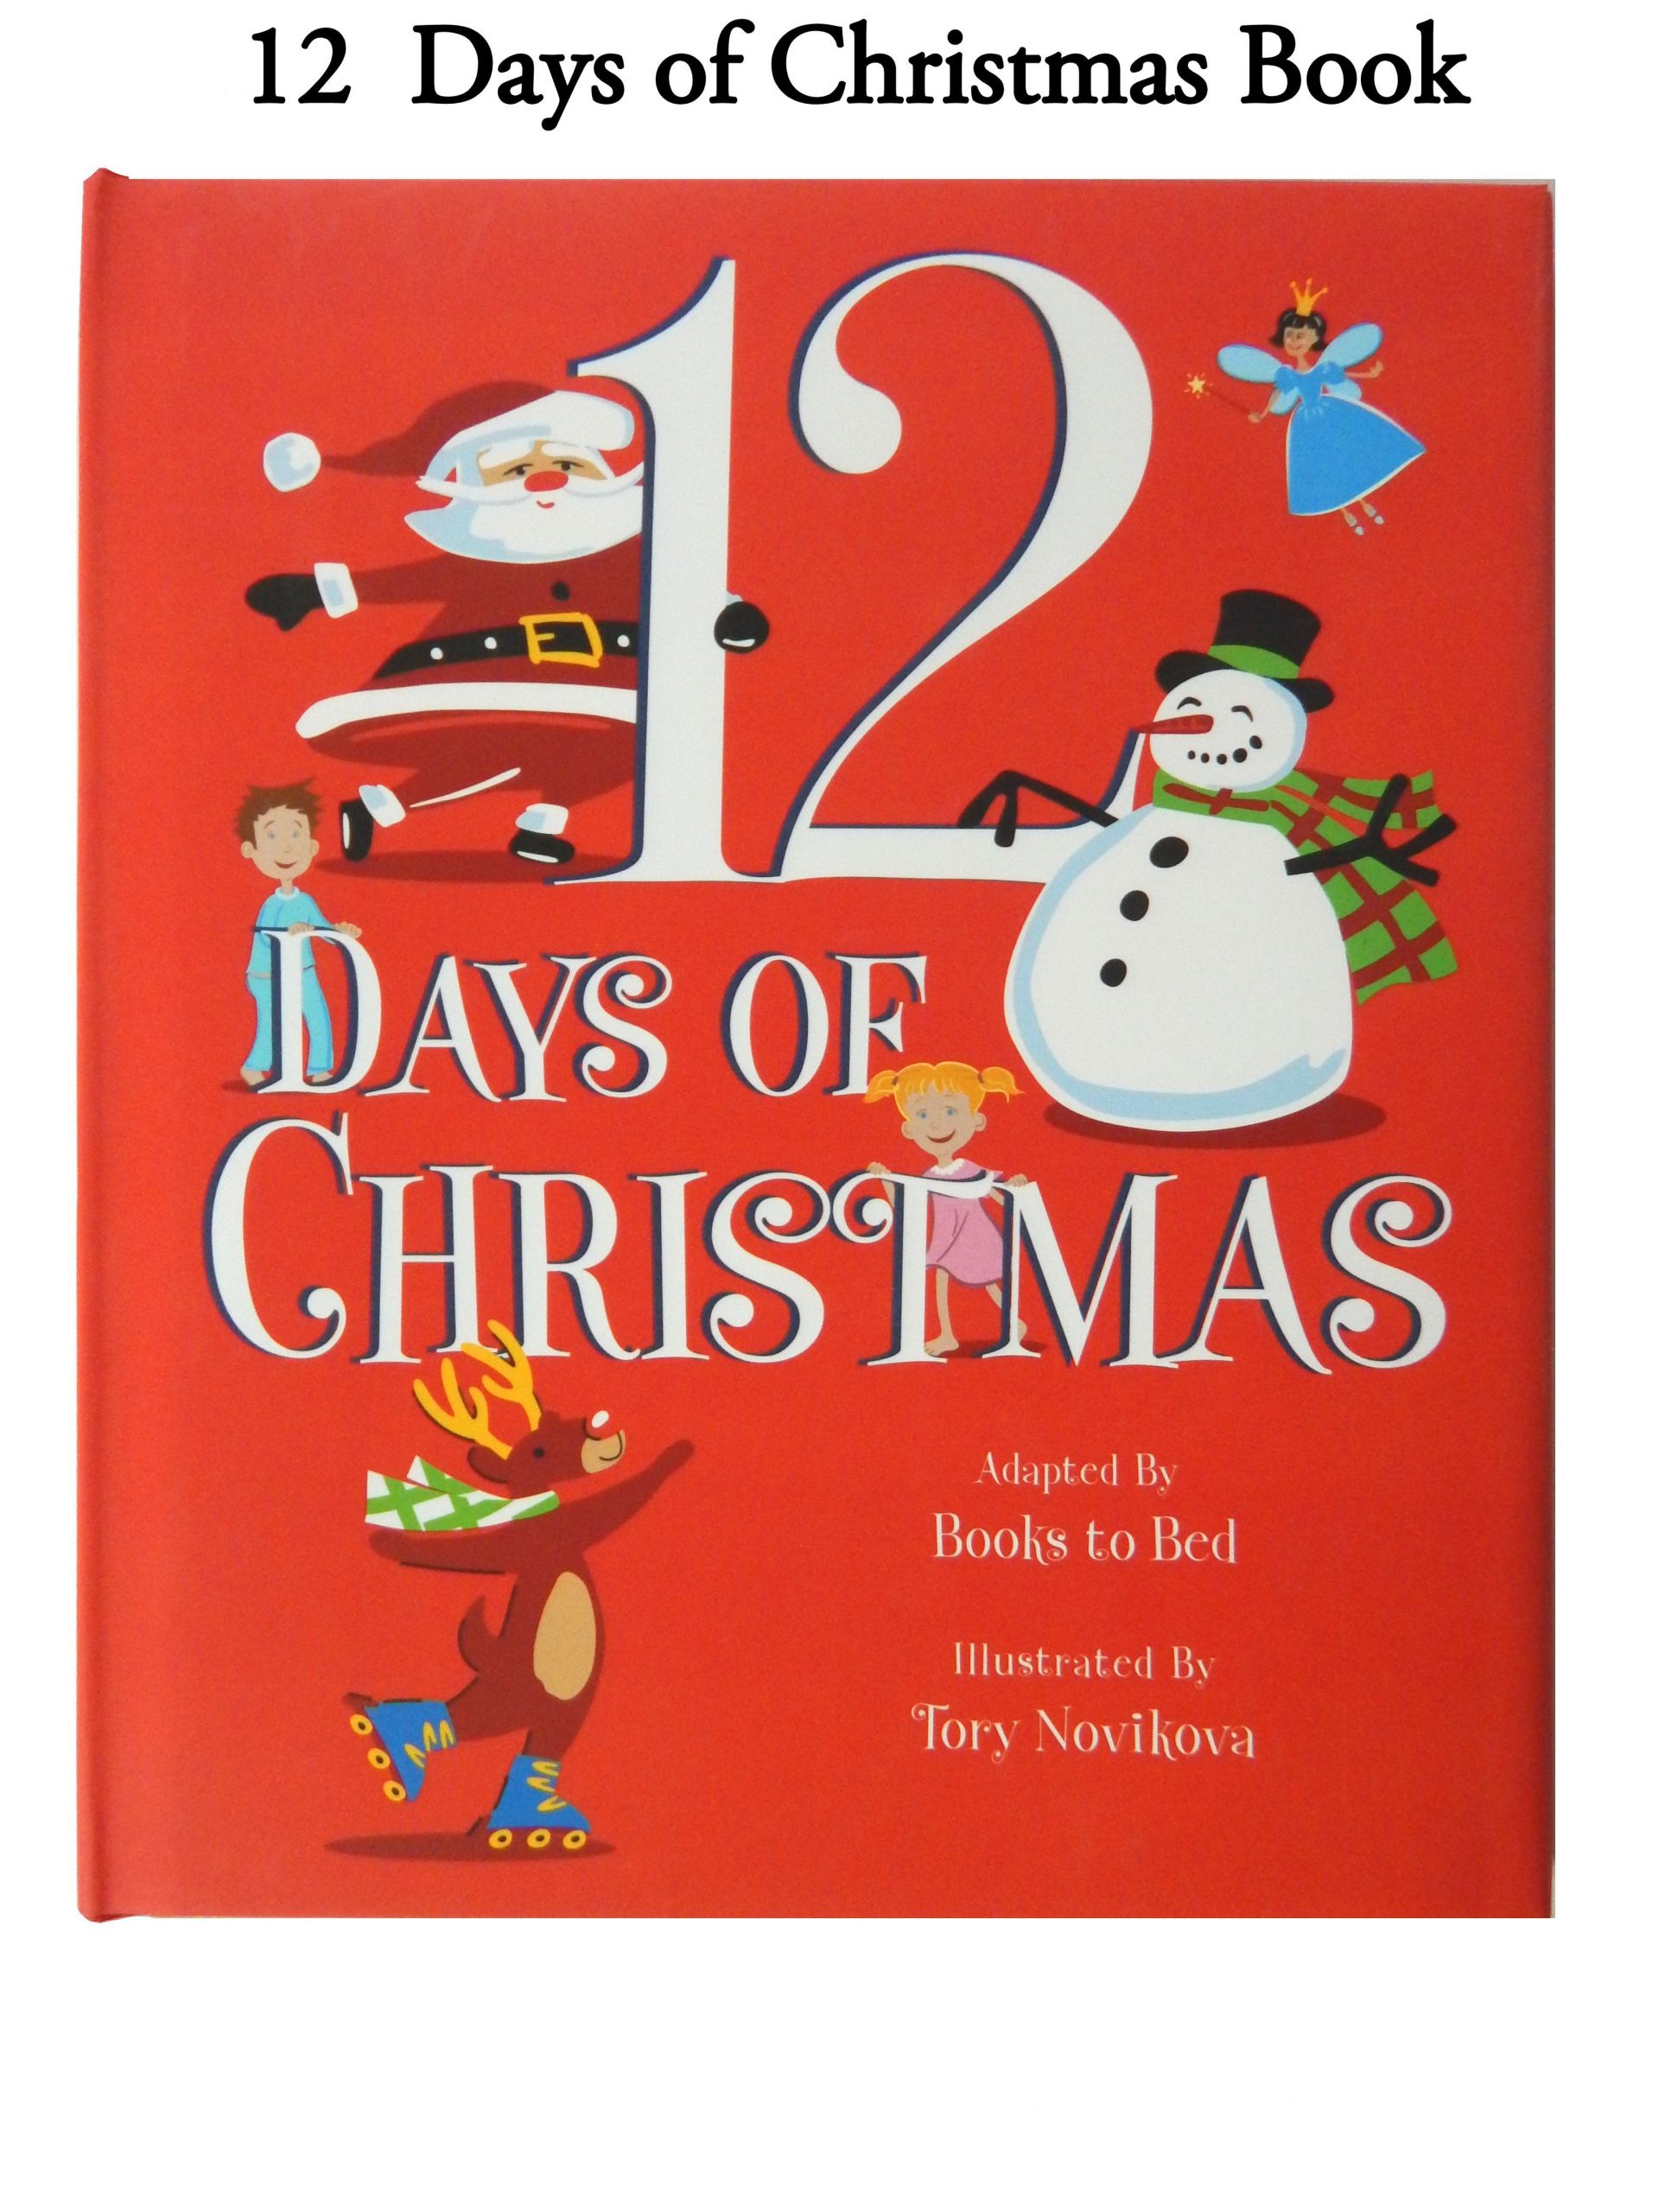 12 Days Of Christmas Gift Ideas For Kids
 Pin by Pajamas Books and Dolls on Christmas Gift Ideas